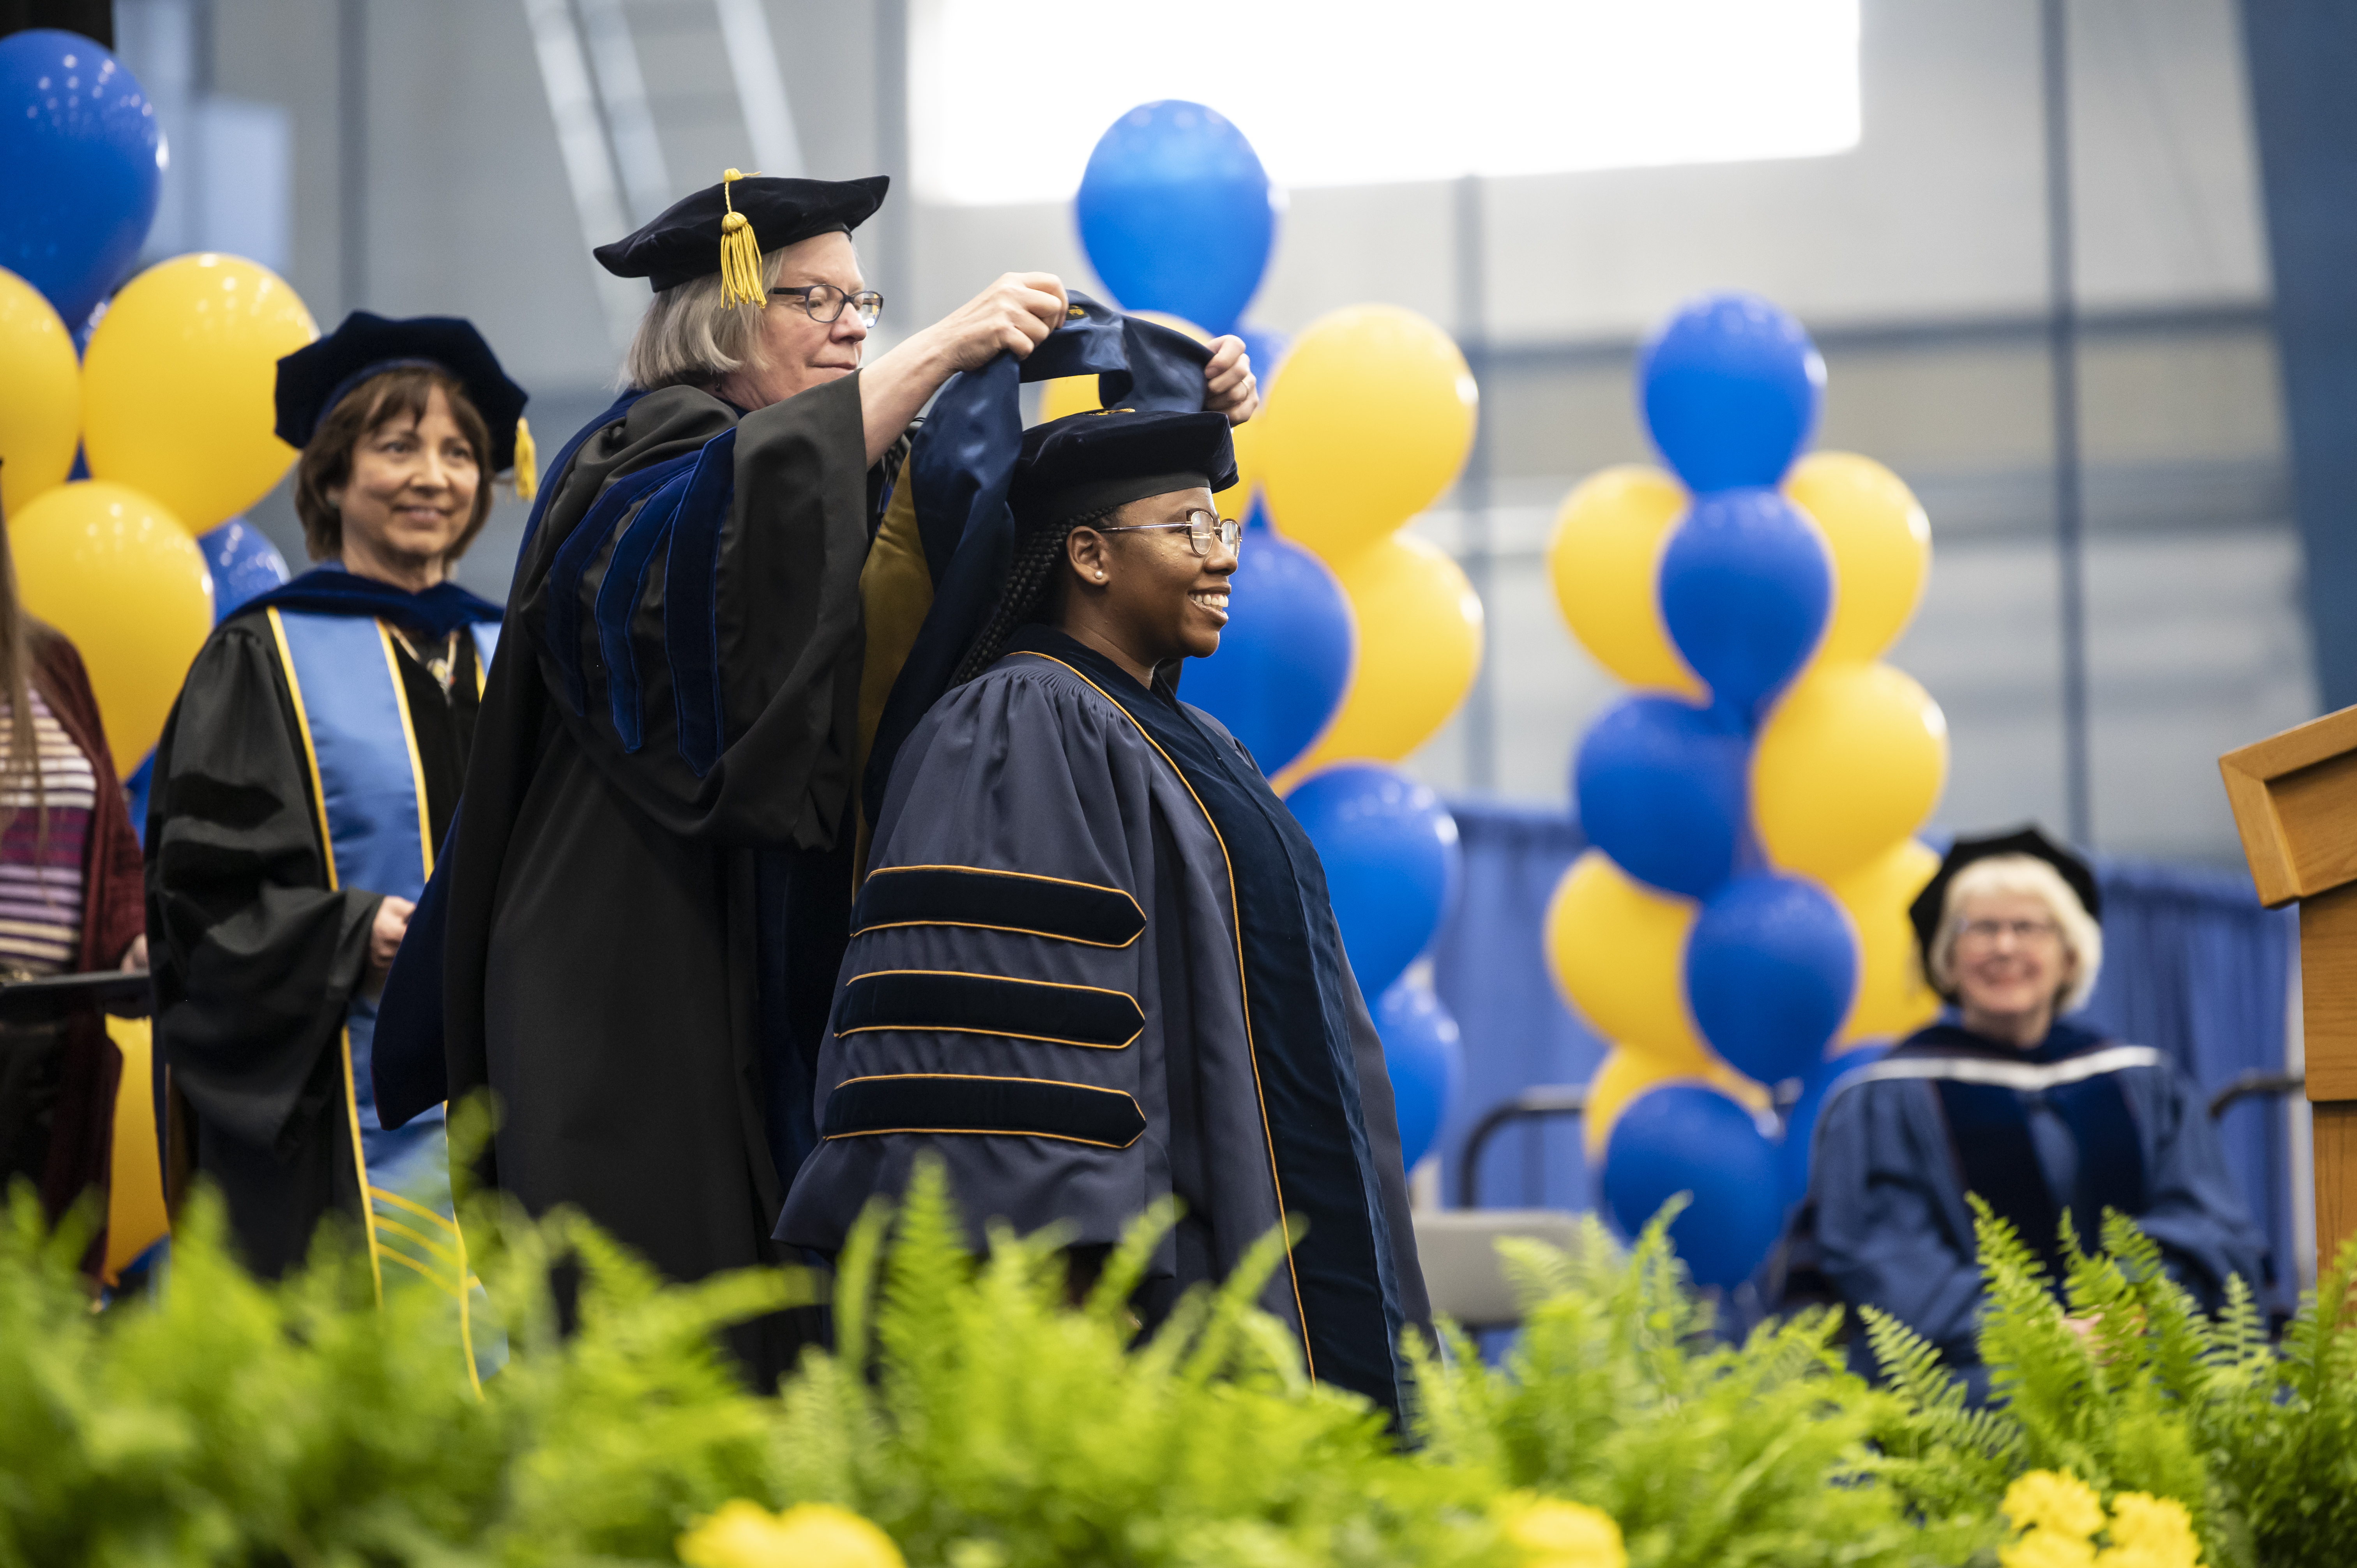 Student receives doctoral hood from Dean Blee